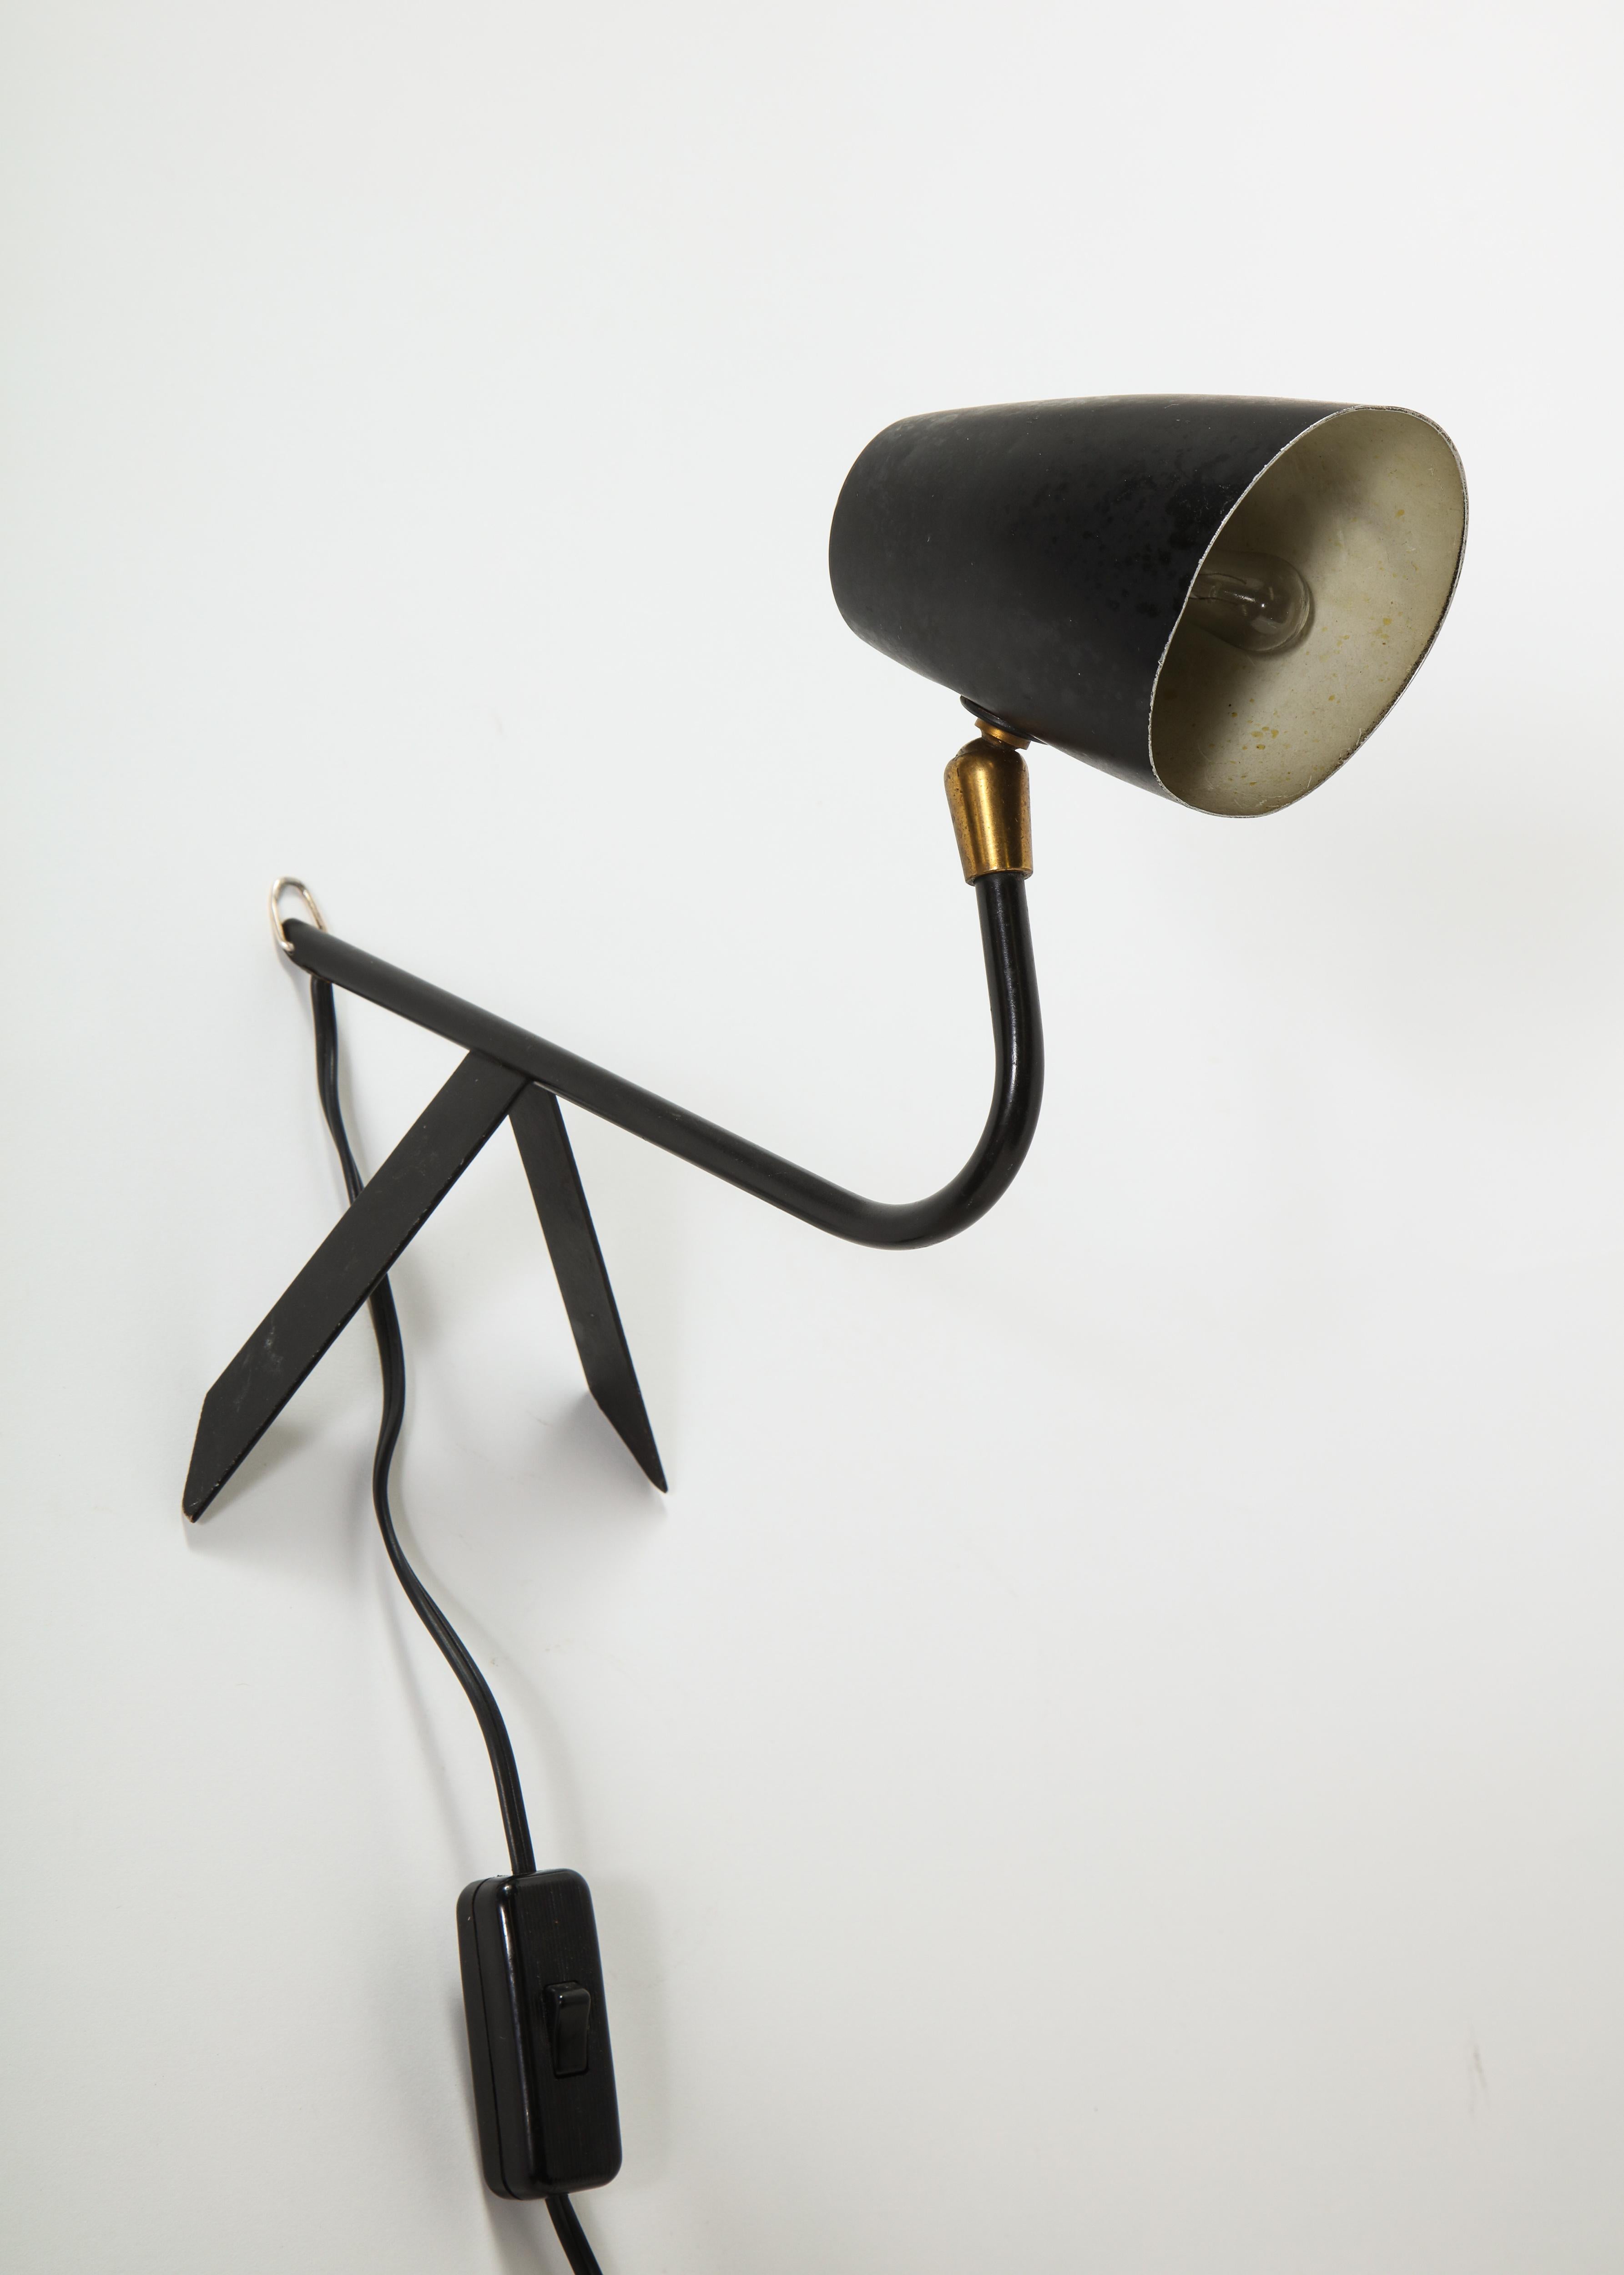 Petite Midcentury French Black Metal and Brass Desk Lamp 3